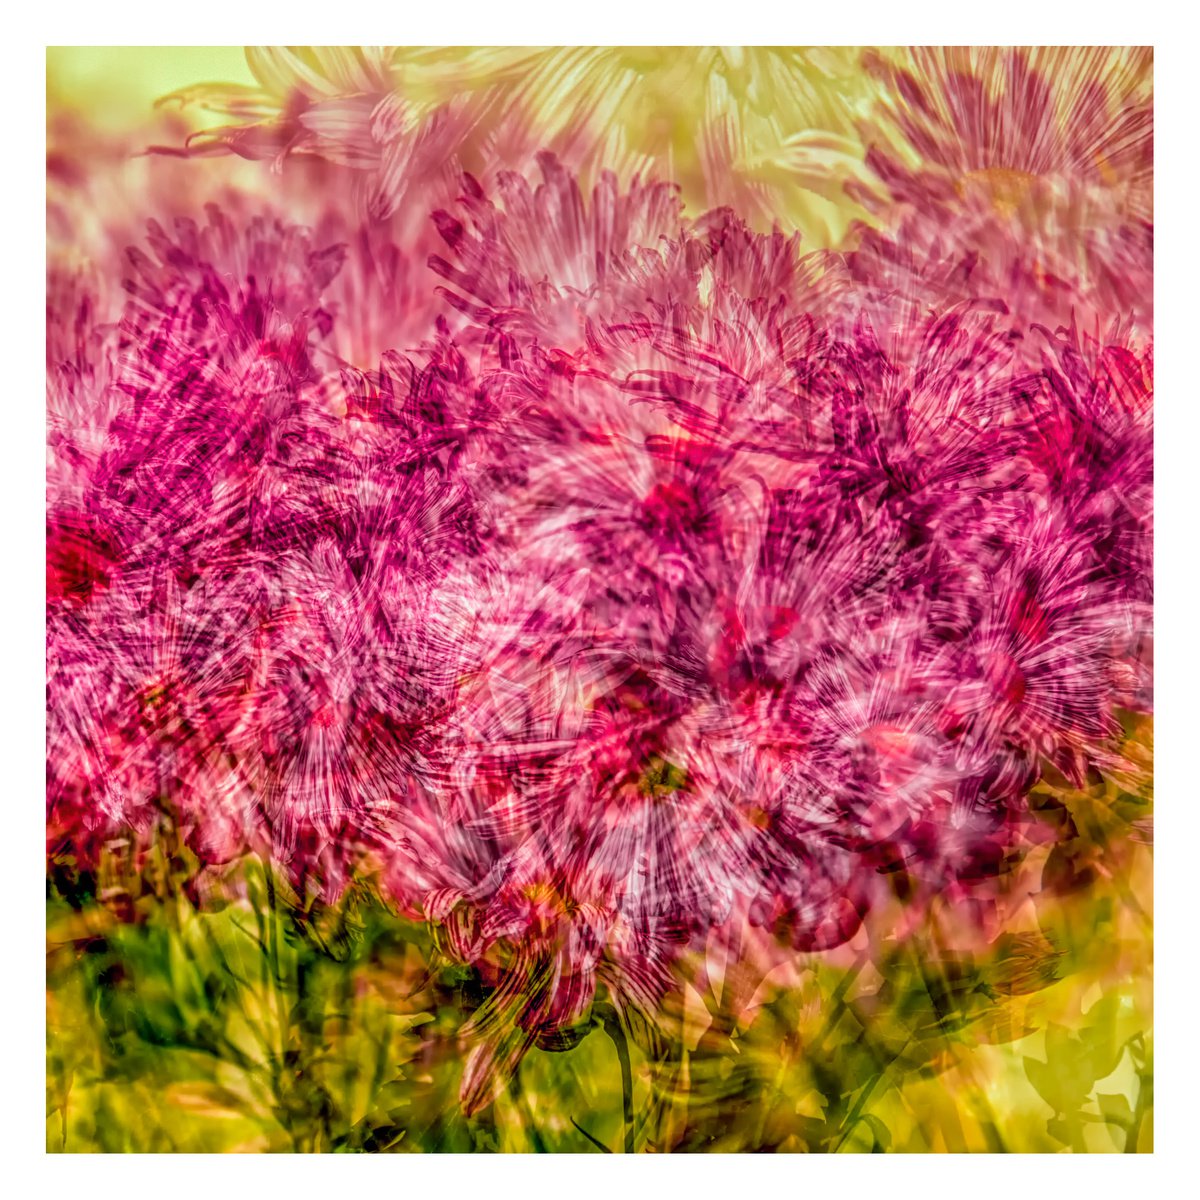 Abstract Flowers #5. Limited Edition 1/25 12x12 inch Photographic Print. by Graham Briggs